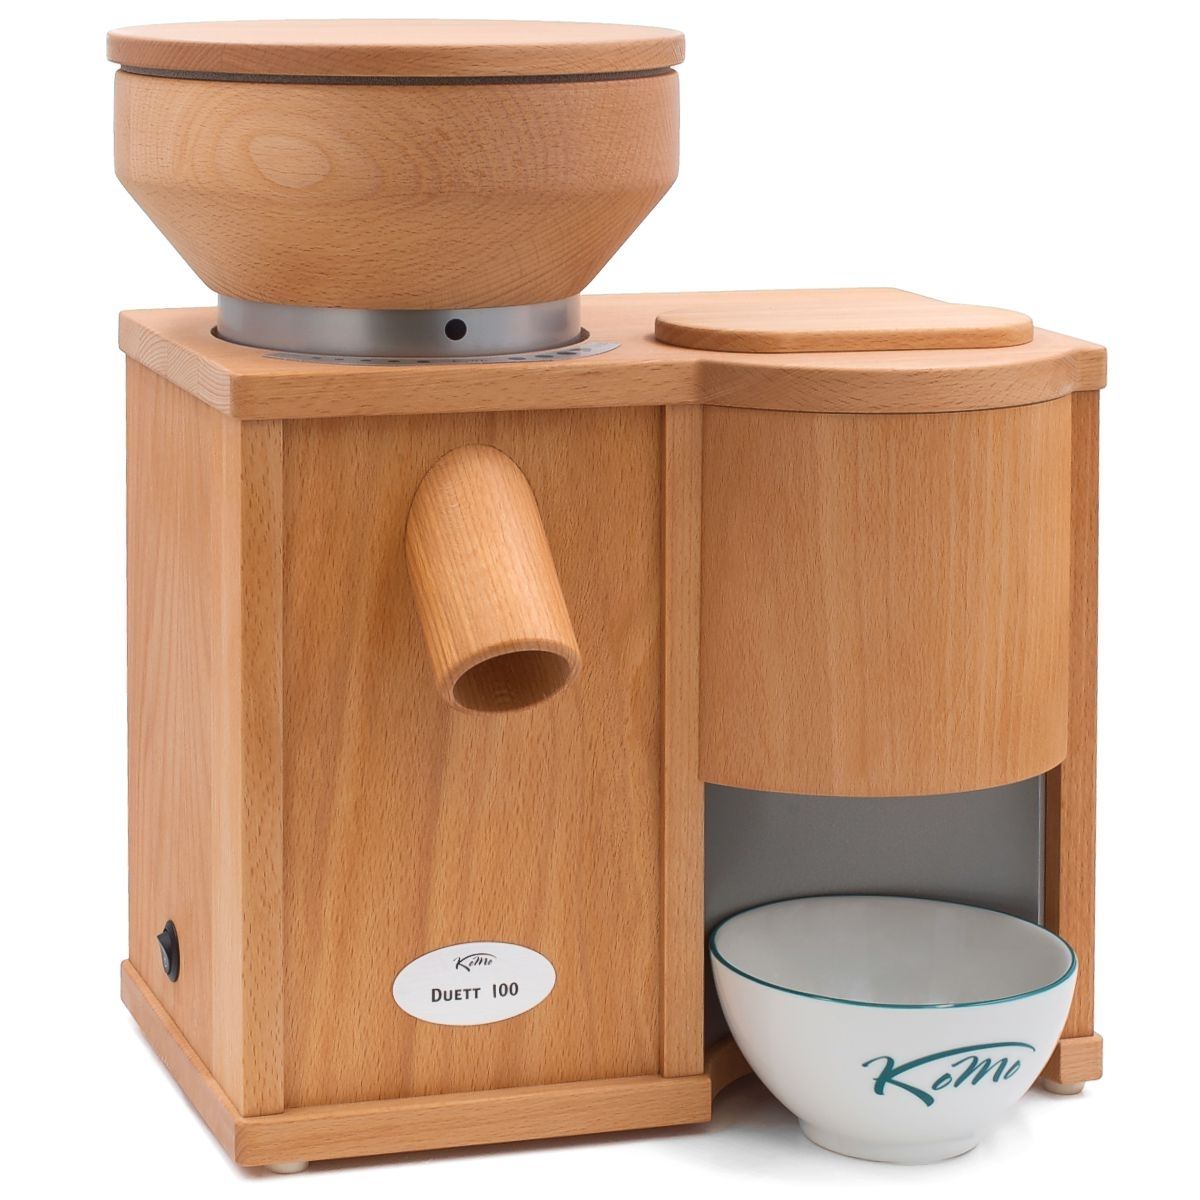 A wooden Komo Mill with a bowl on top perfect for milling your own flour from whole grains